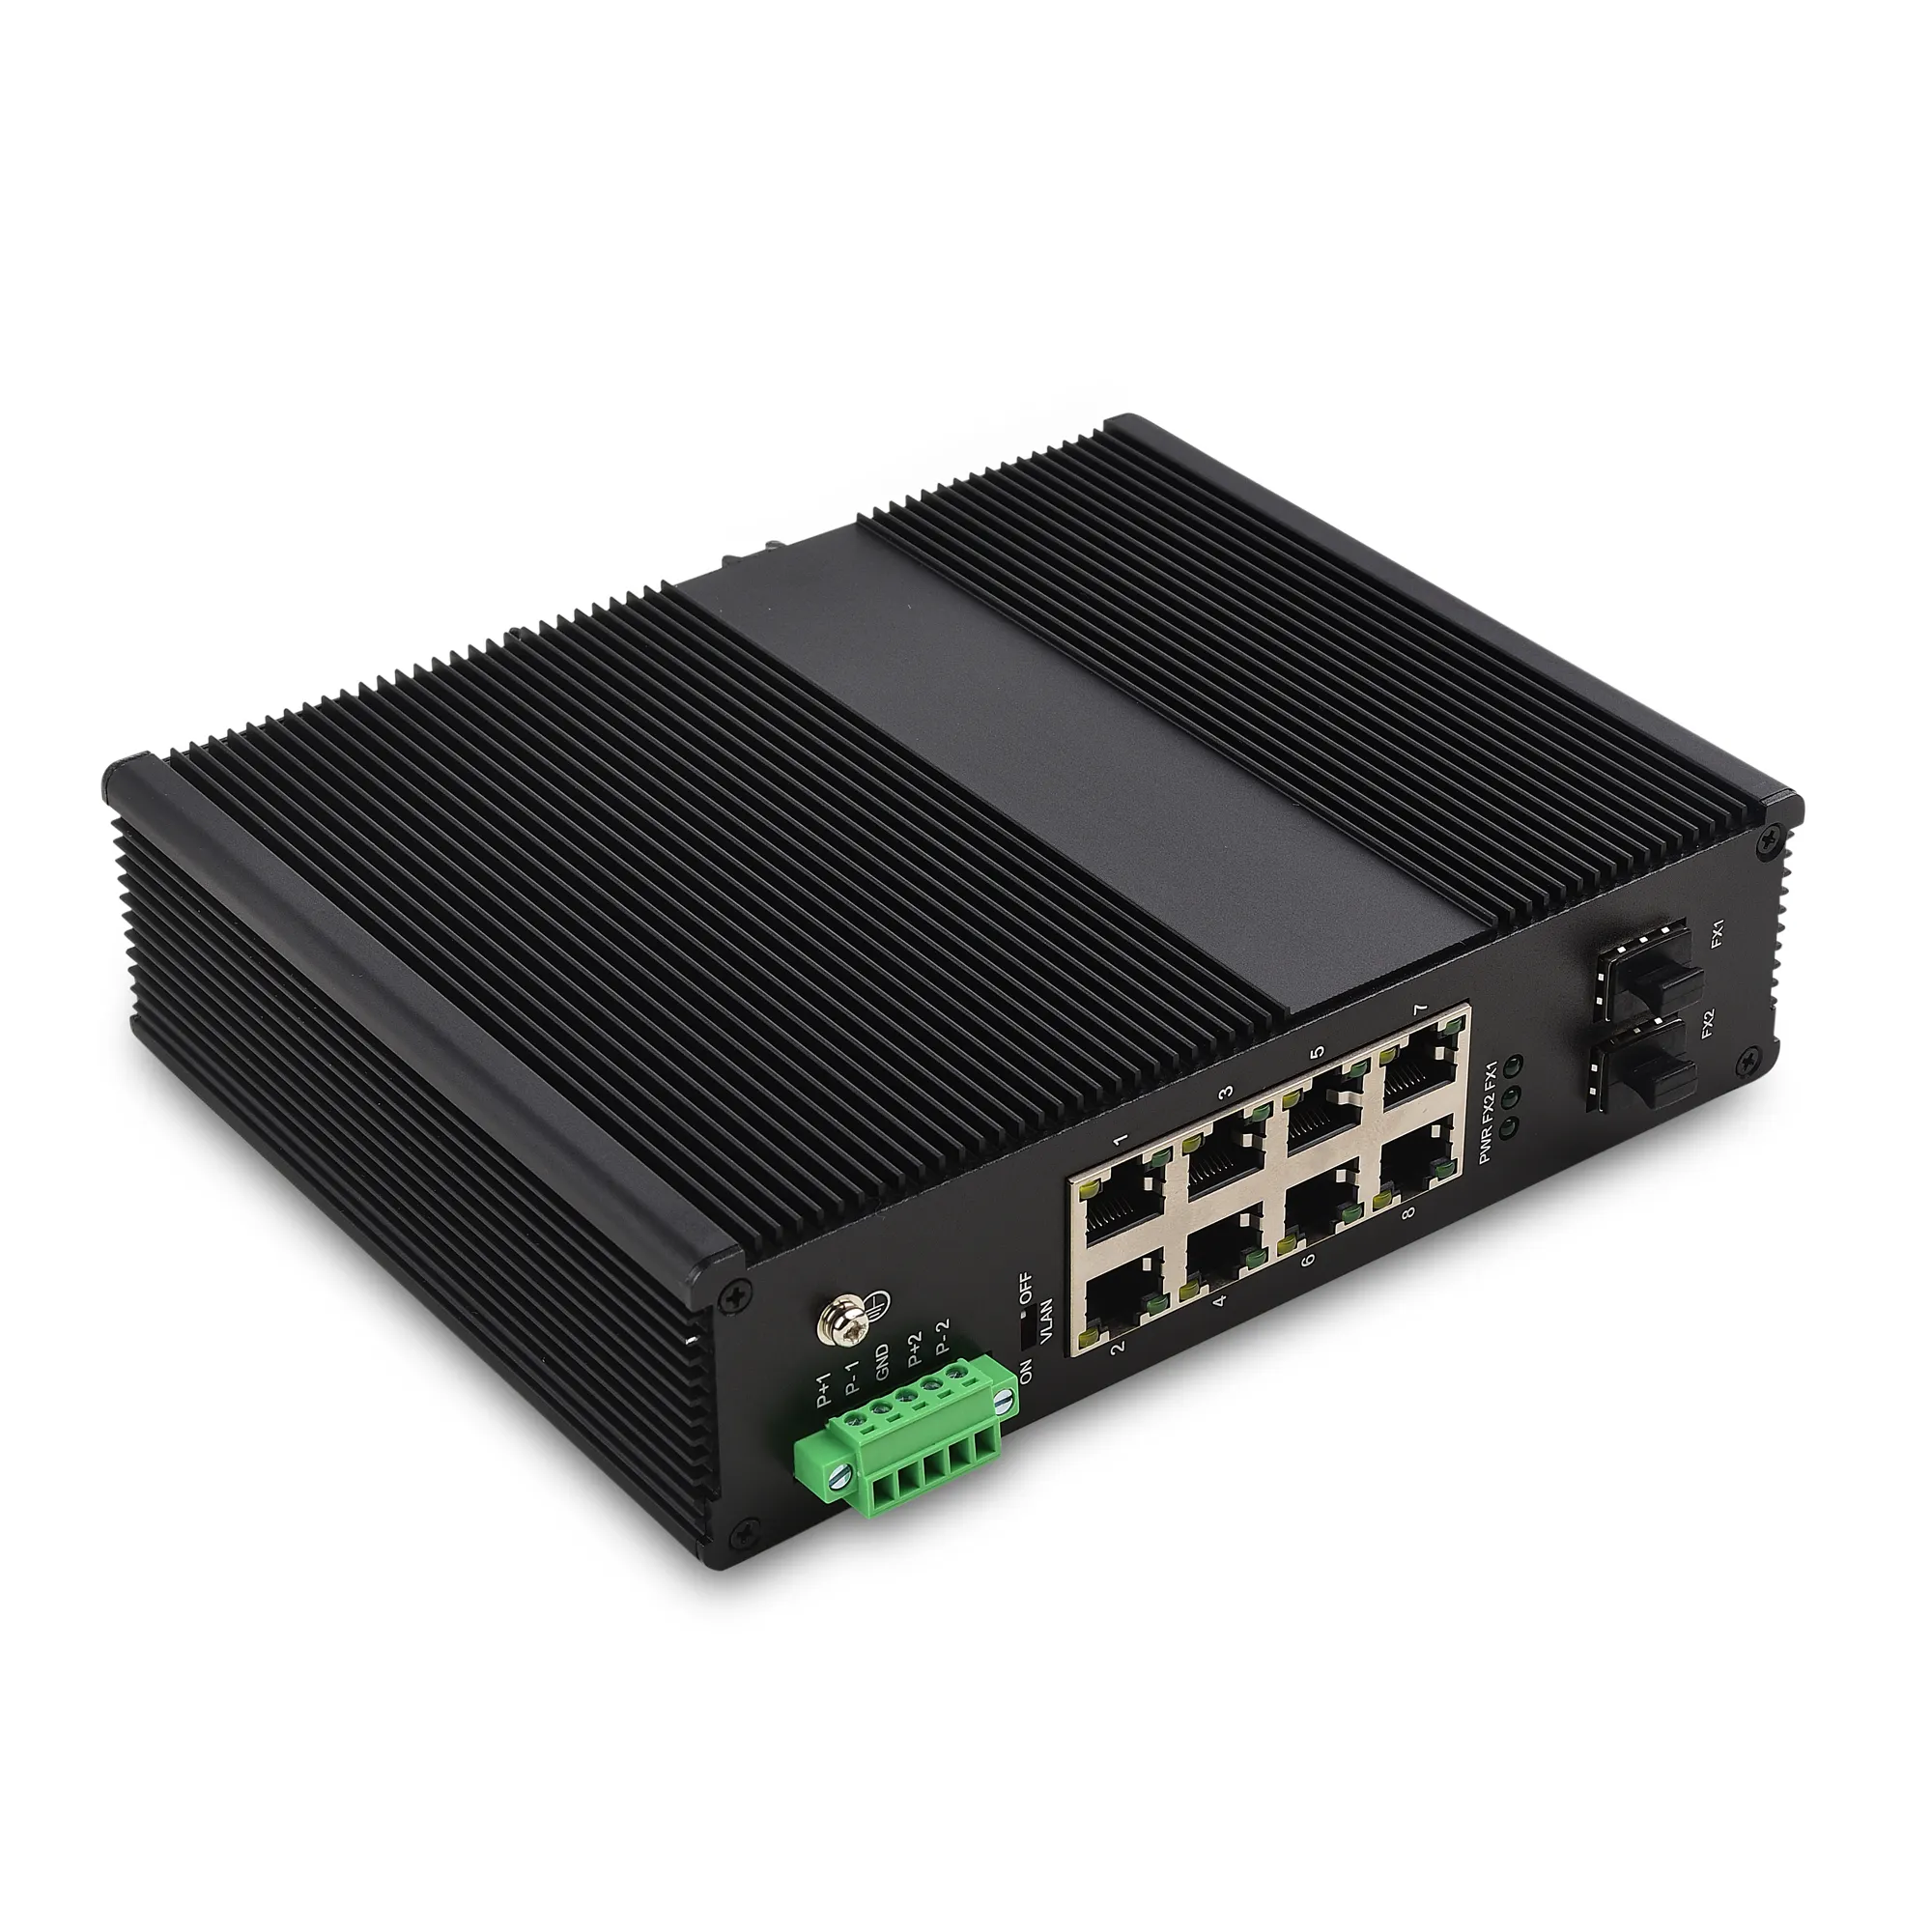 8 port poe industrial switch unmanaged ethernet fiber switch 8 port 10/100/1000Base-TX to 2*1000Base-FX silent operation